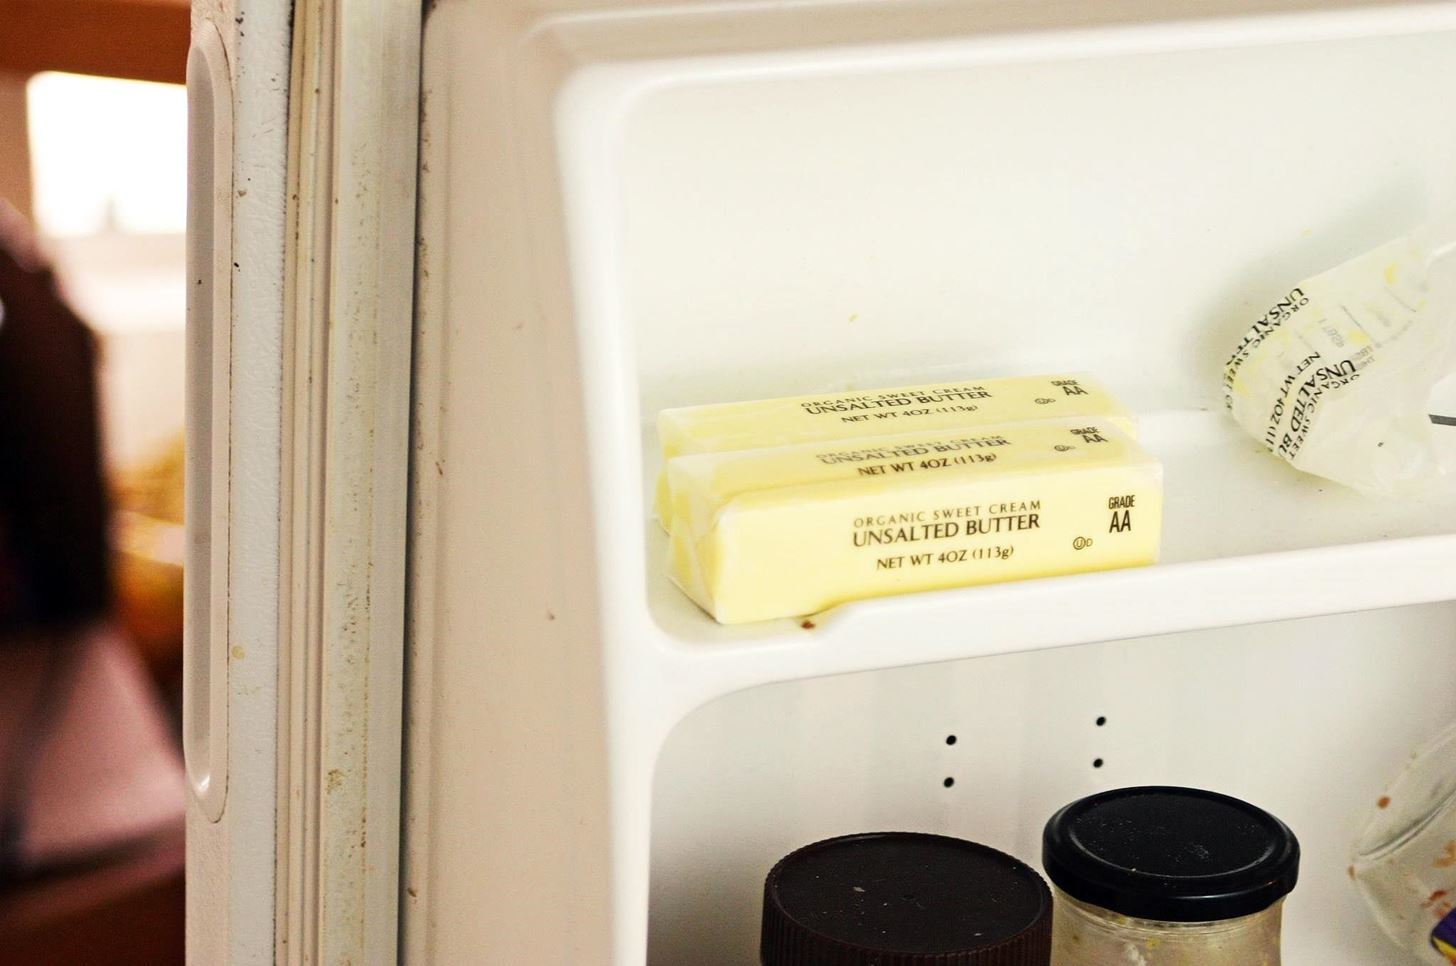 How to Organize Your Fridge More Efficiently